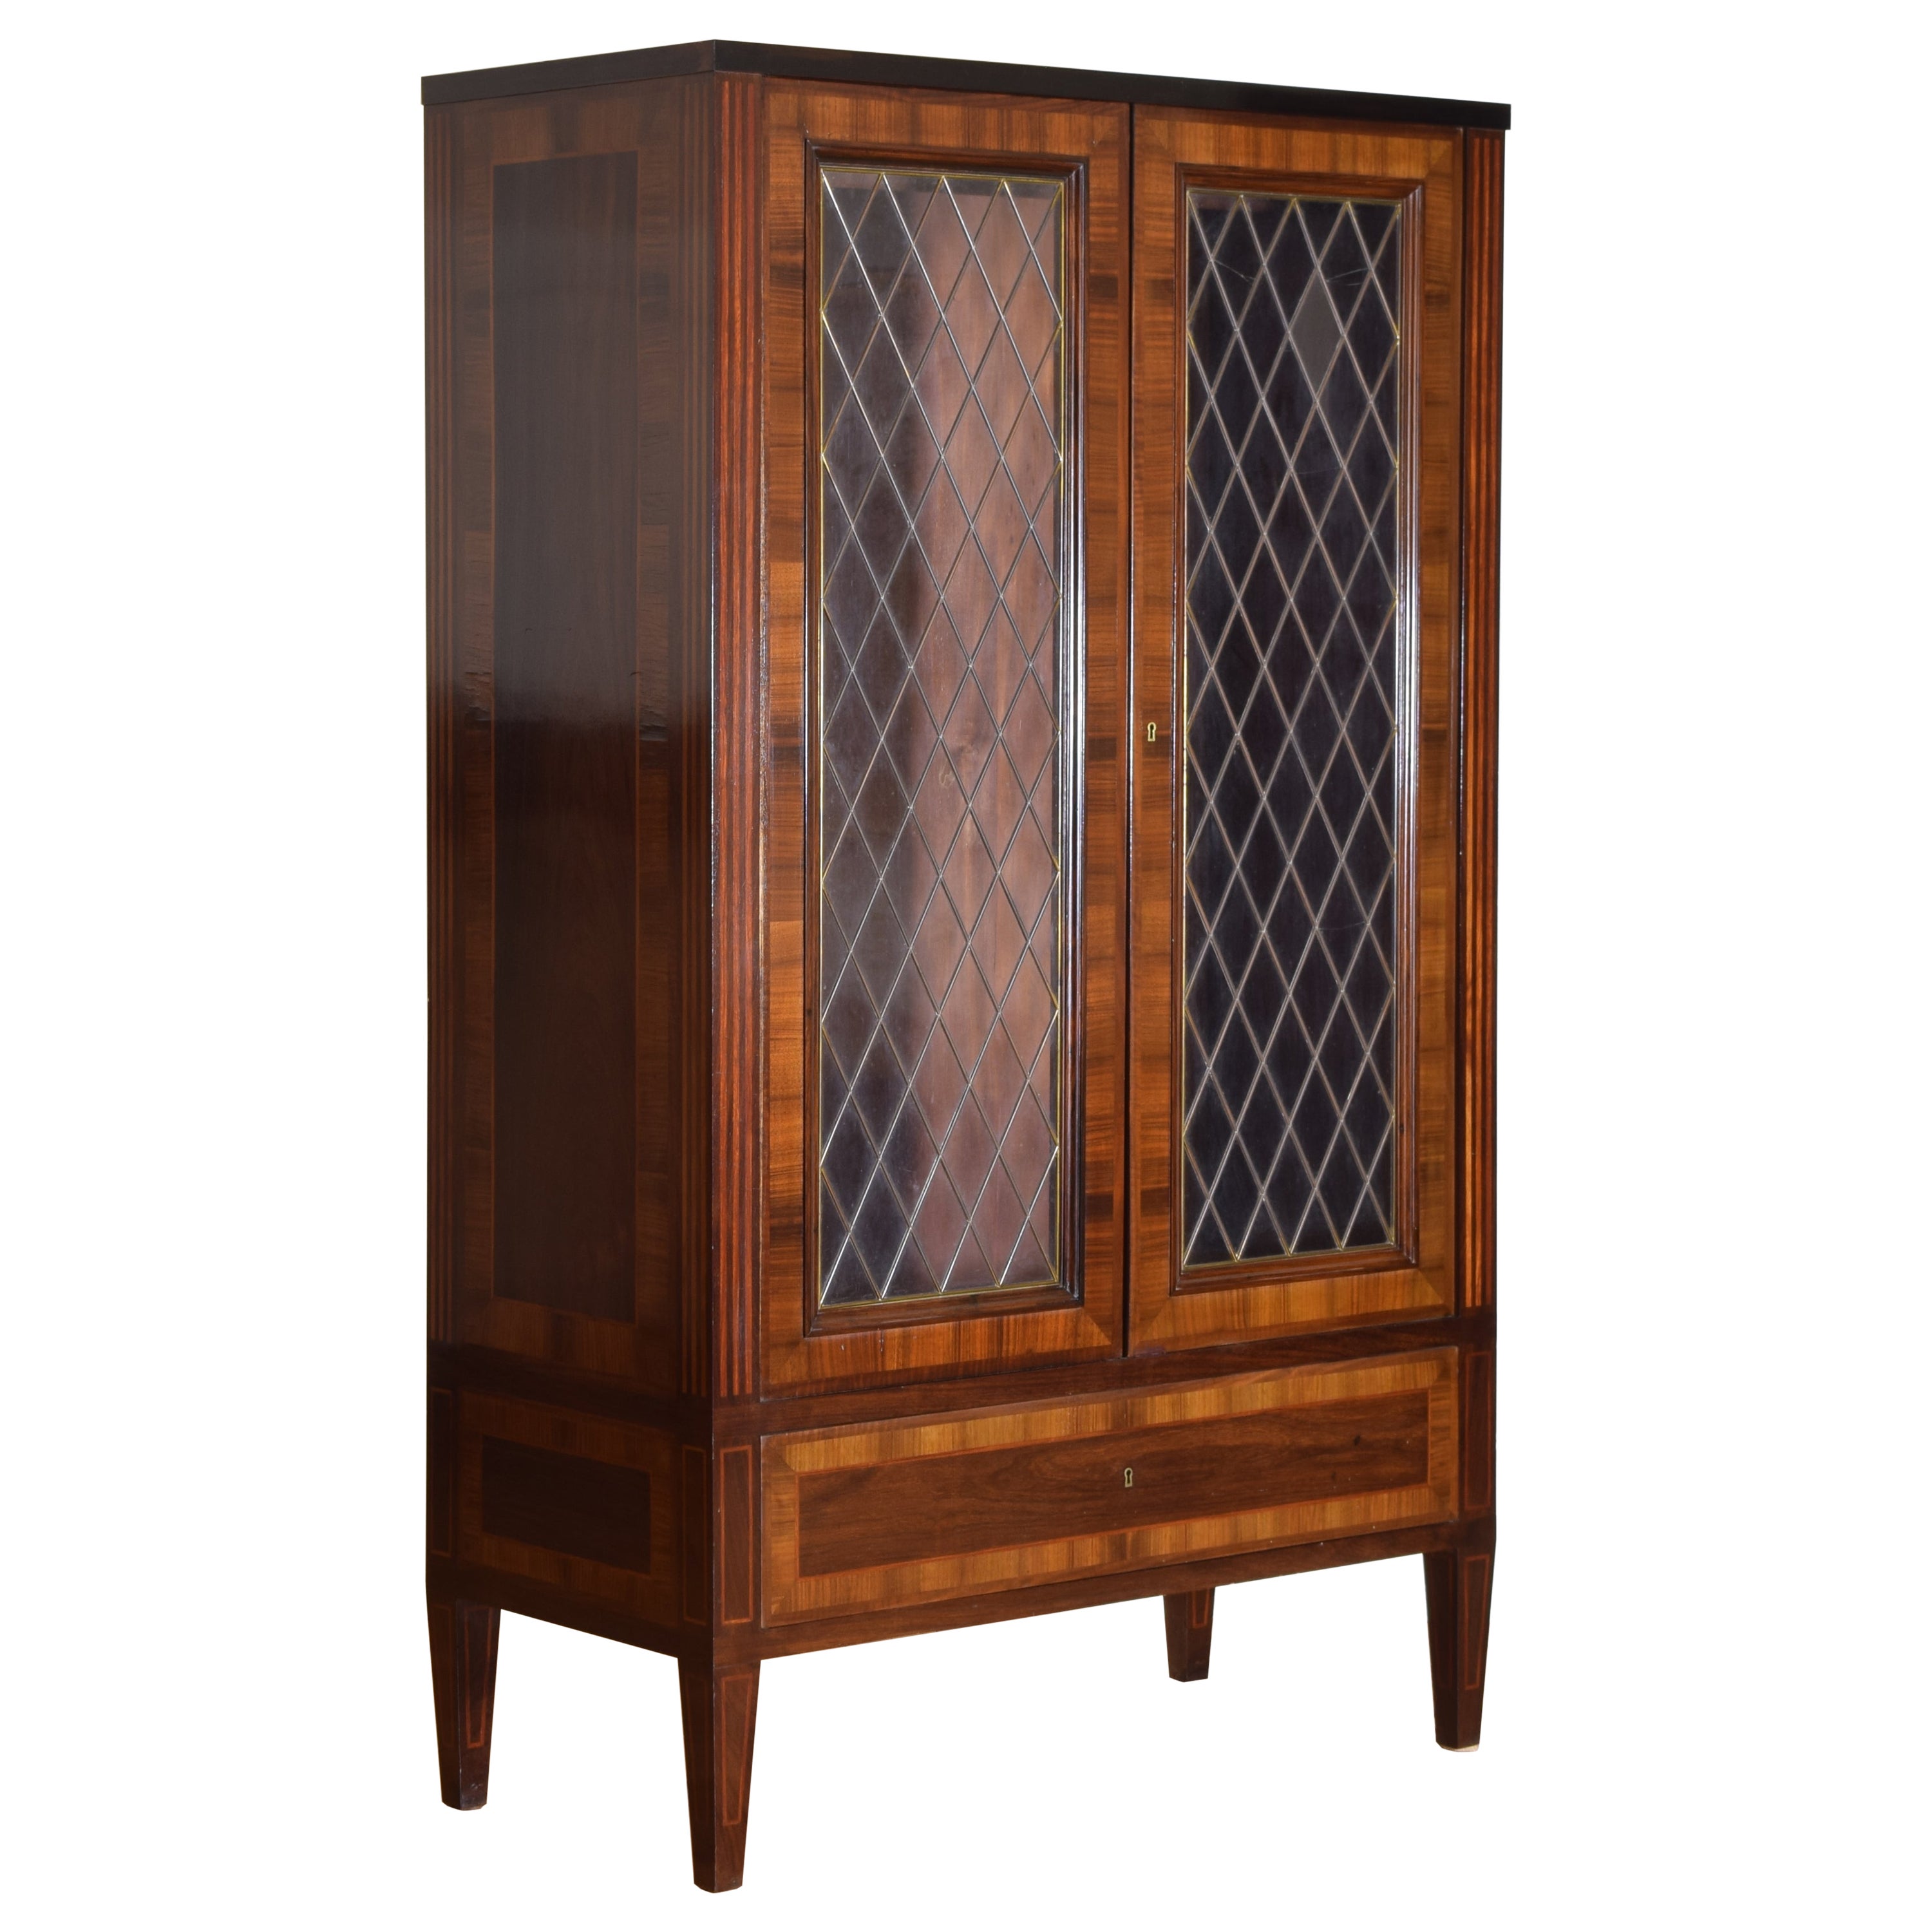 Italian Neoclassic Style Walnut & Inlaid Glass Door Armoire, Mid 20th Century For Sale